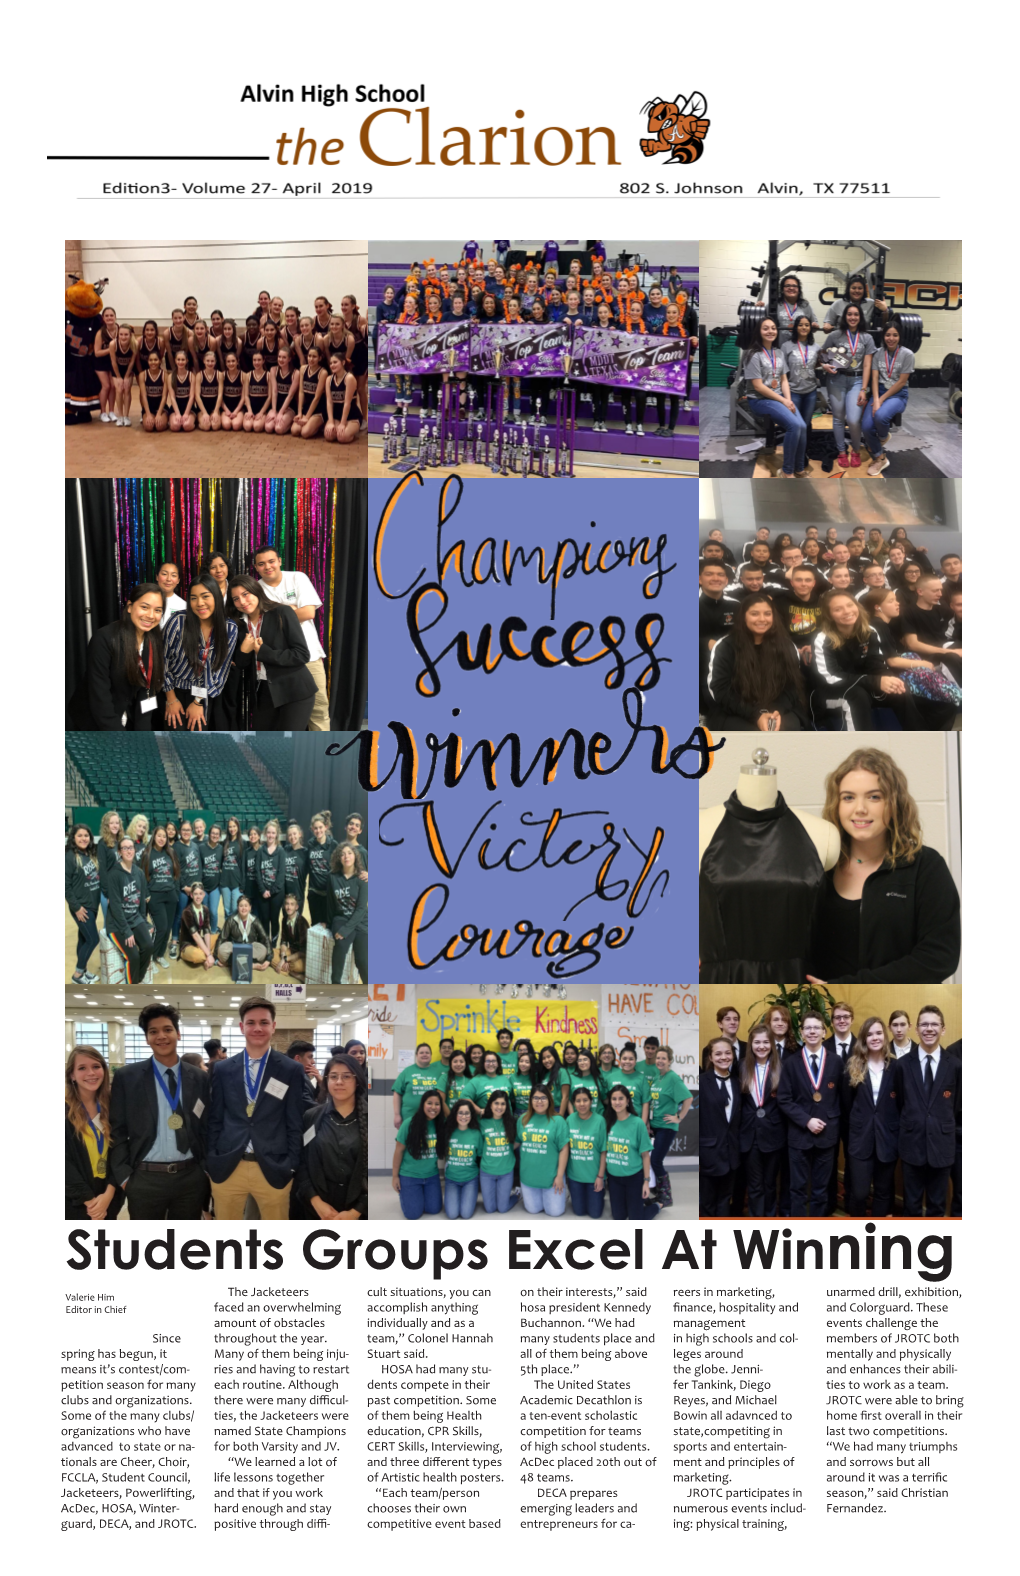 Students Groups Excel at Winning